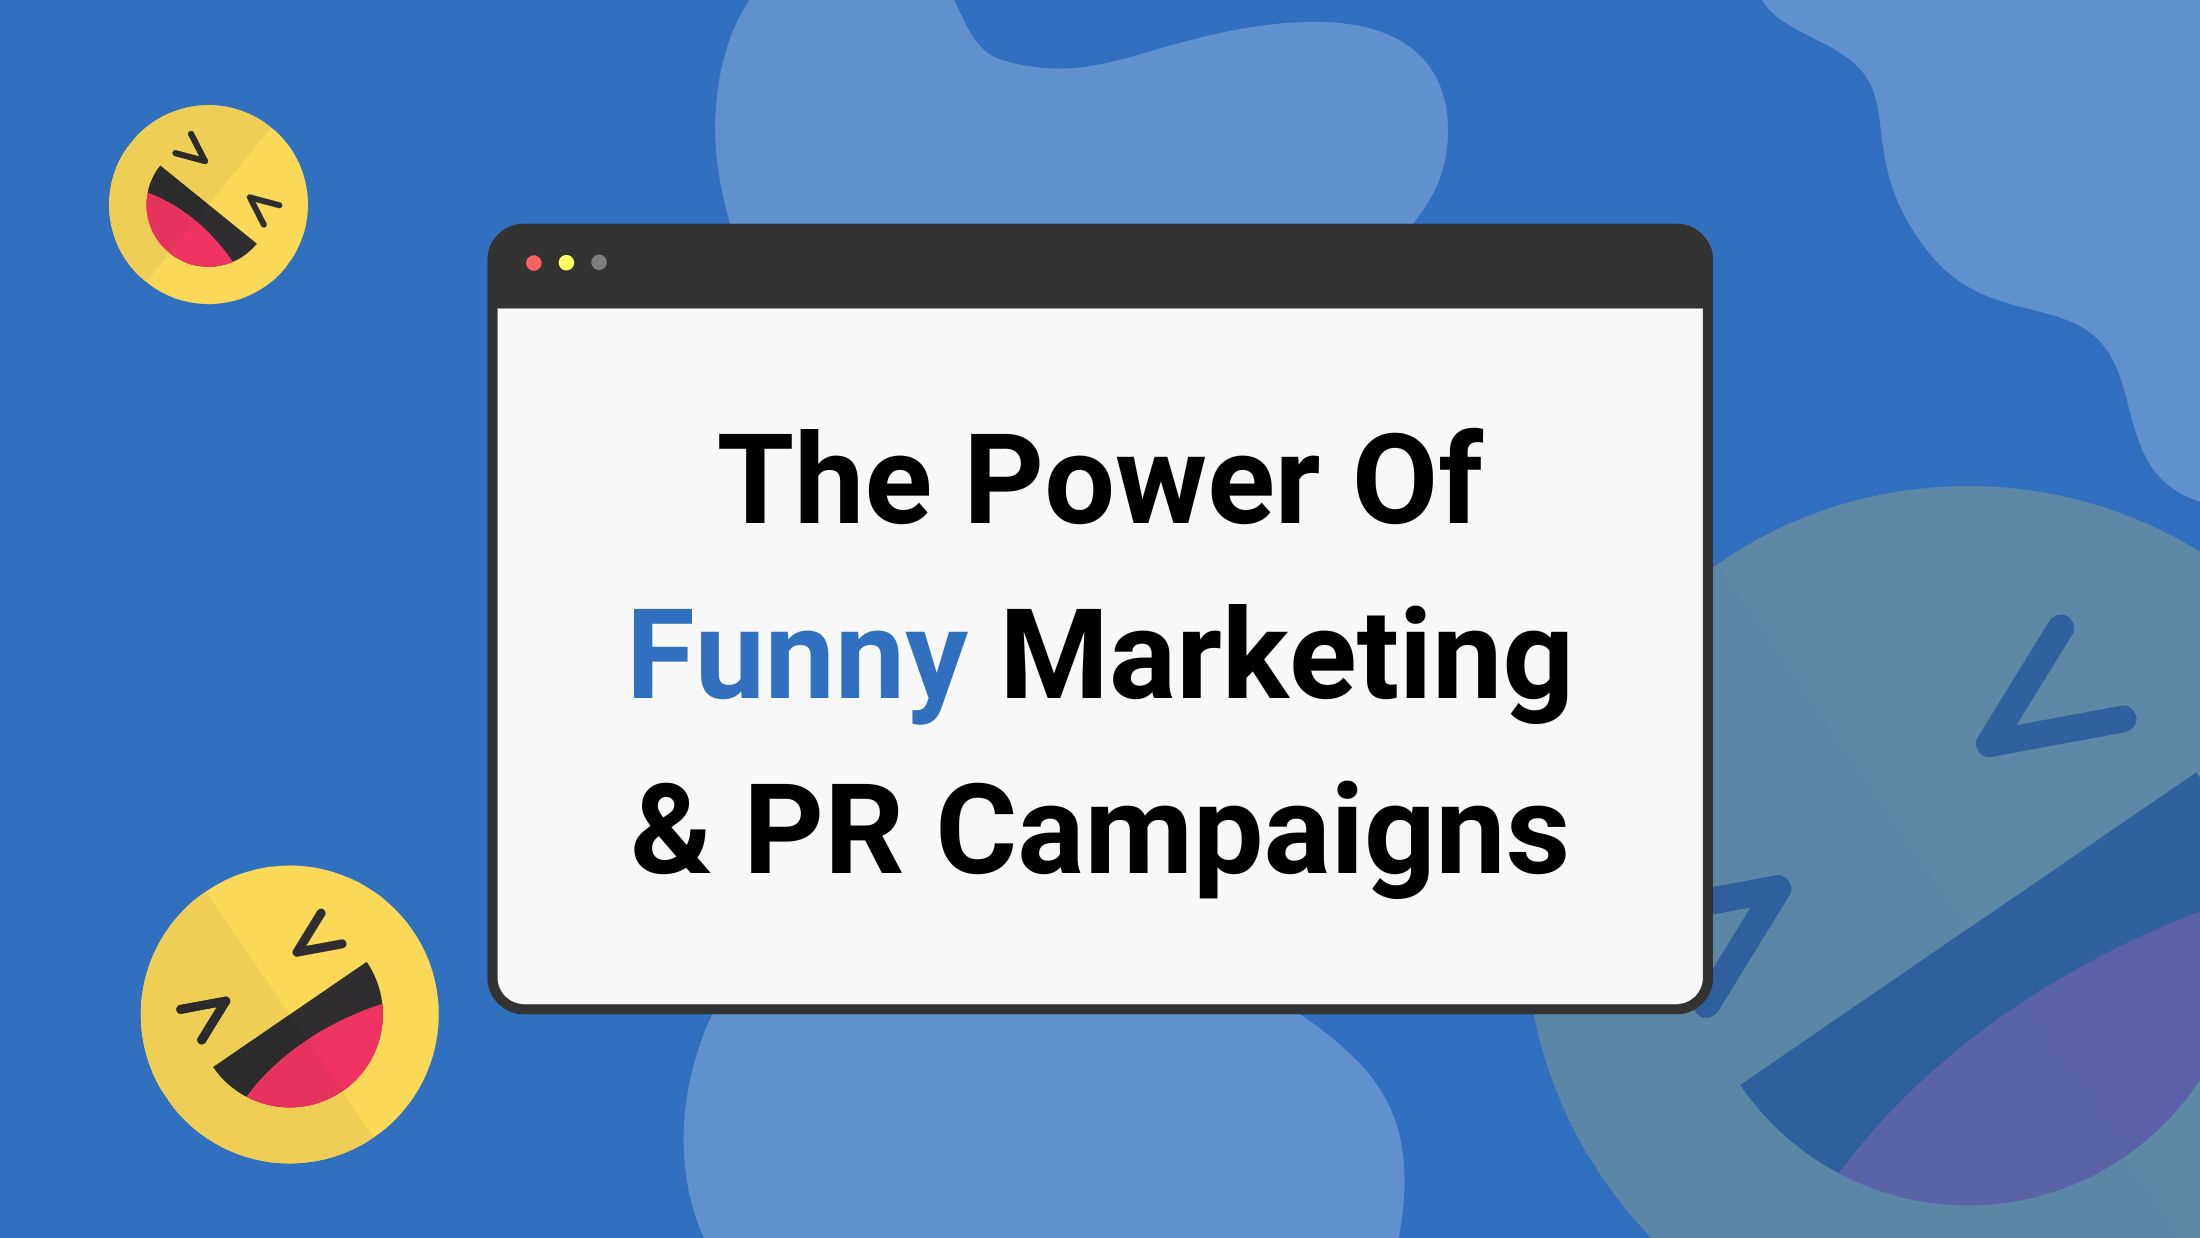 April Fool’s Day: The Power Of Funny Marketing & PR Campaigns